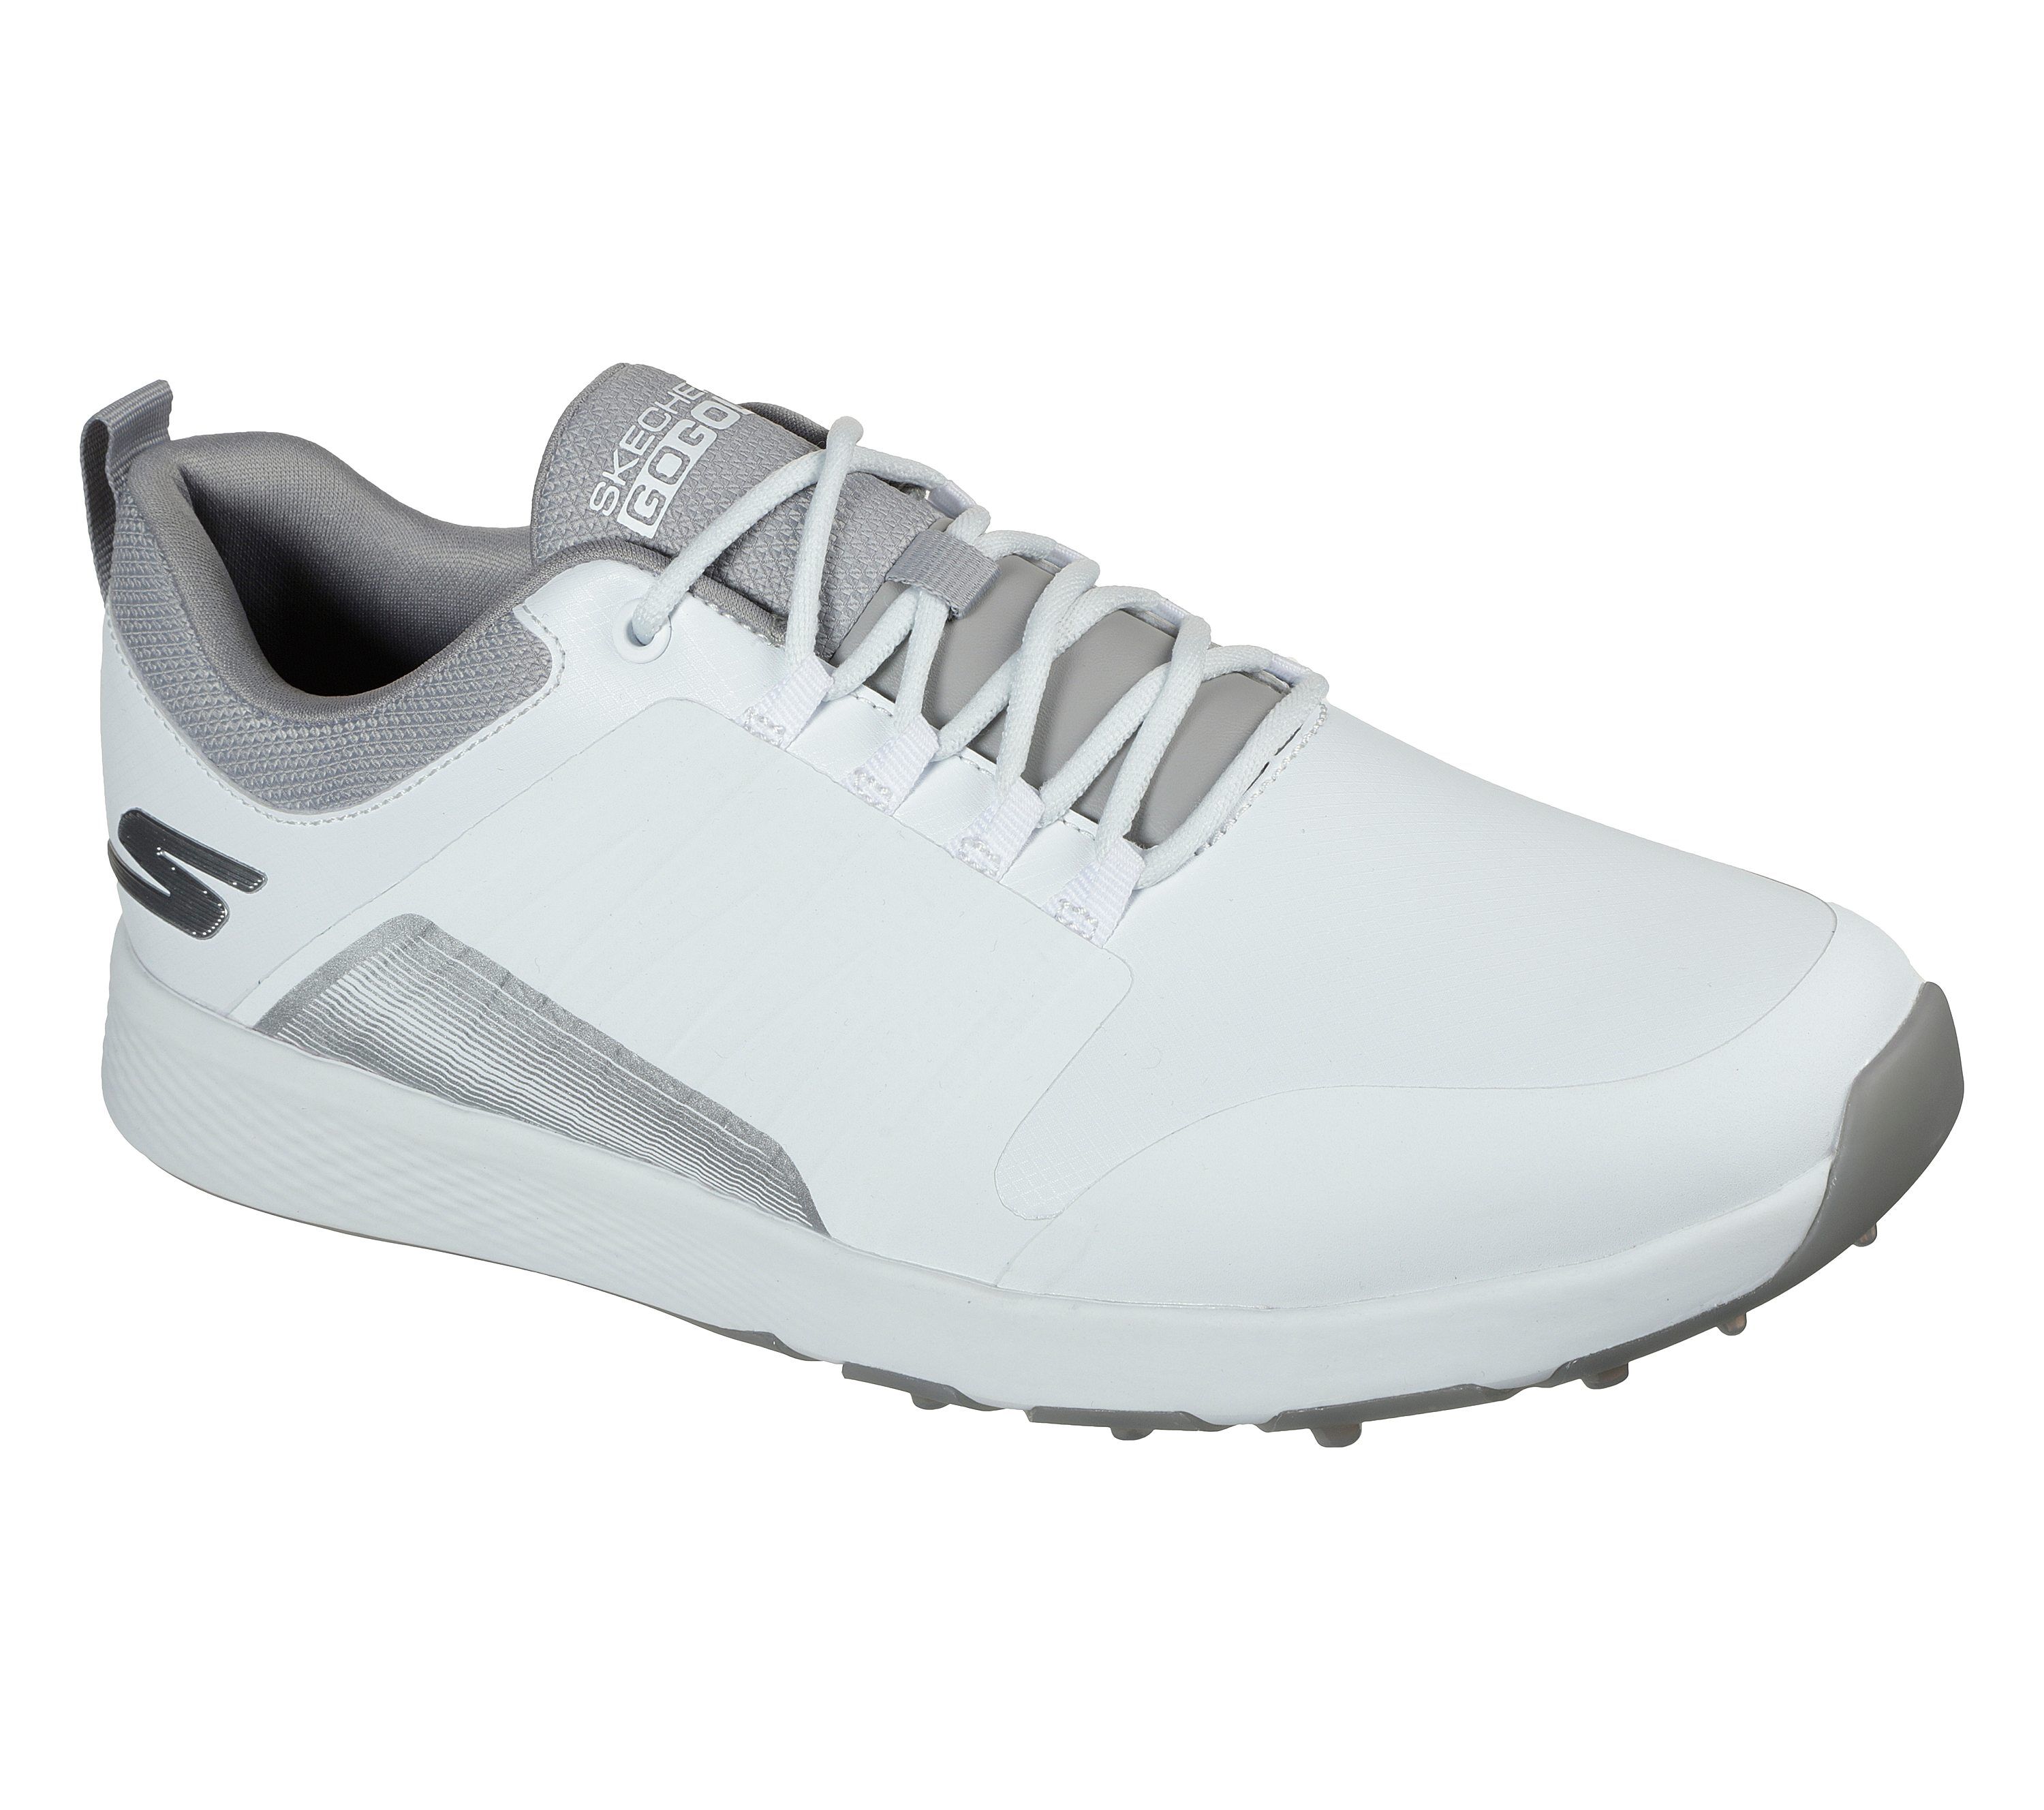 skechers golf shoes where to buy